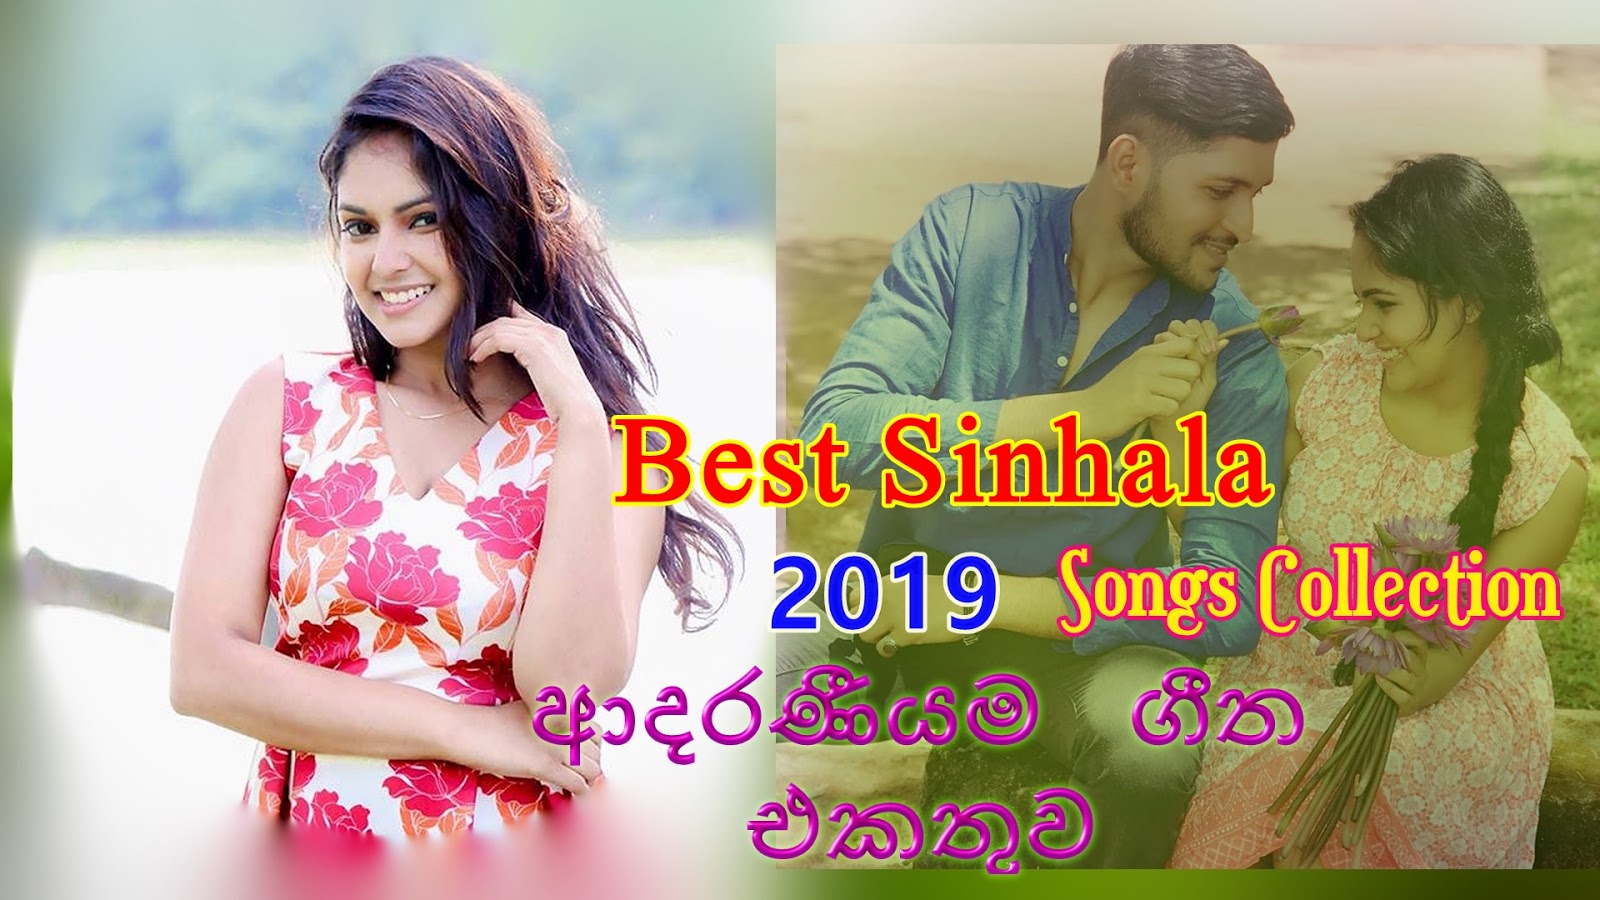 Love New Sinhala Songs - Get Images One